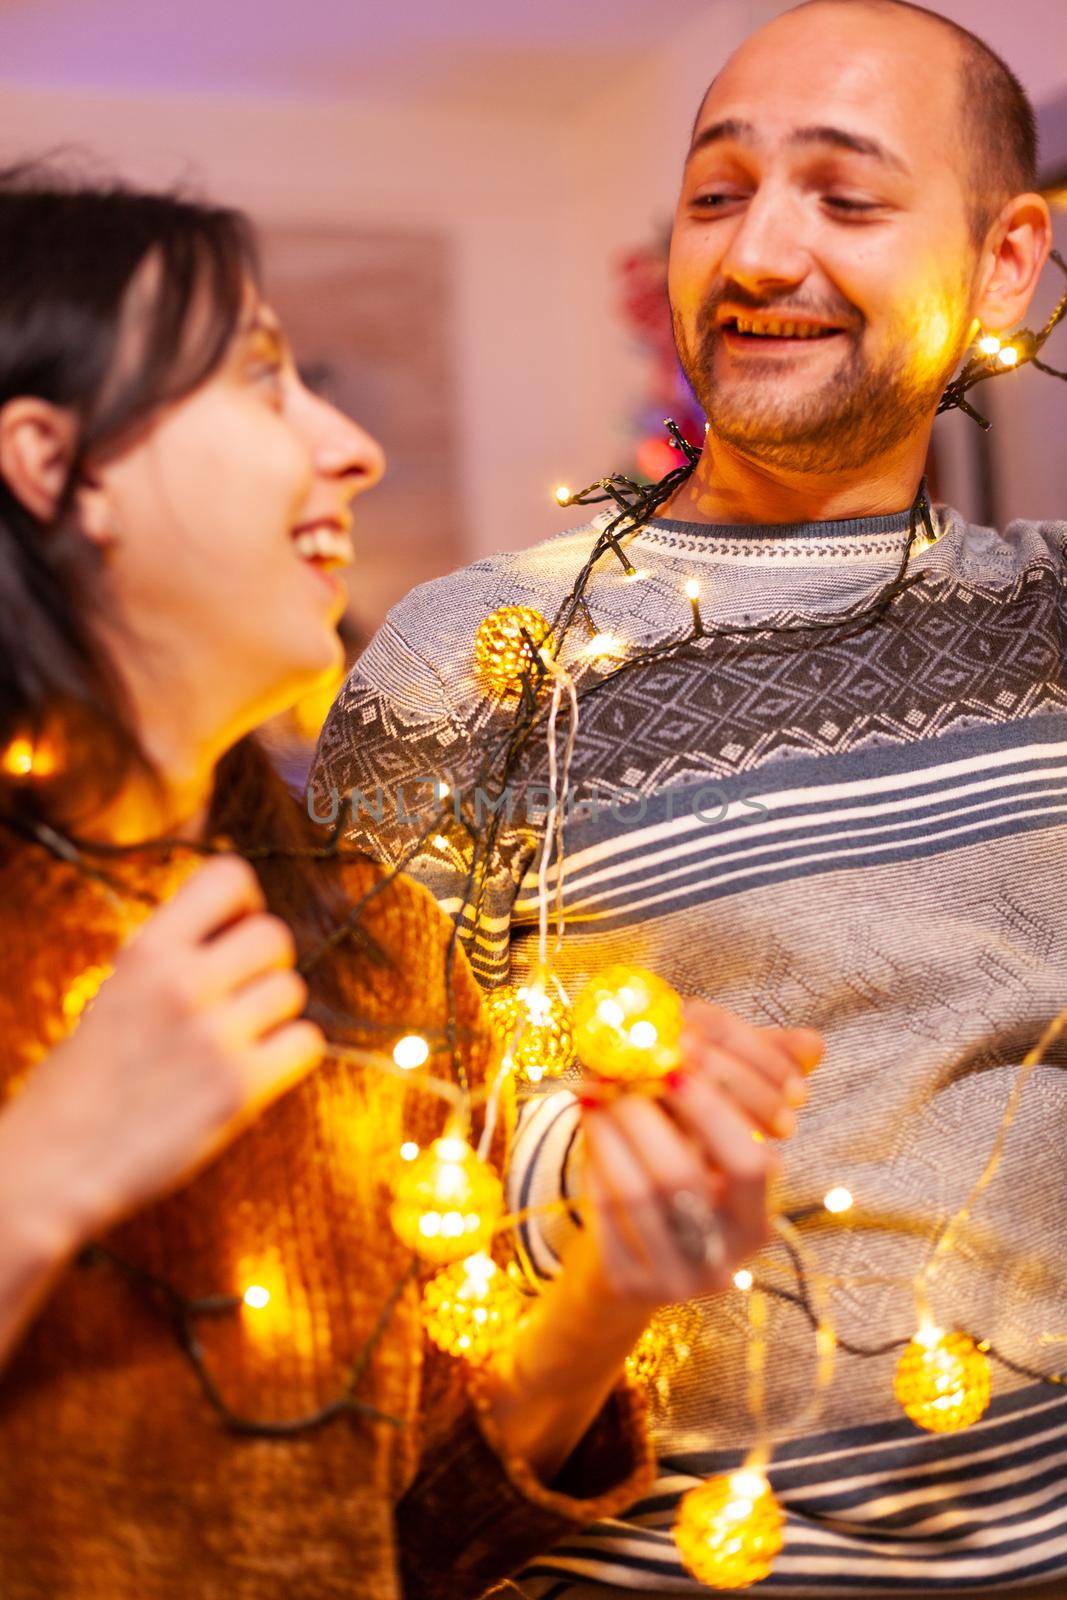 Family stuck in christmas tree lights in xmas decorated kitchen celebrating christmas holiday. Happy couple making funny while enjoying spending winter season together. New-year festive tradition